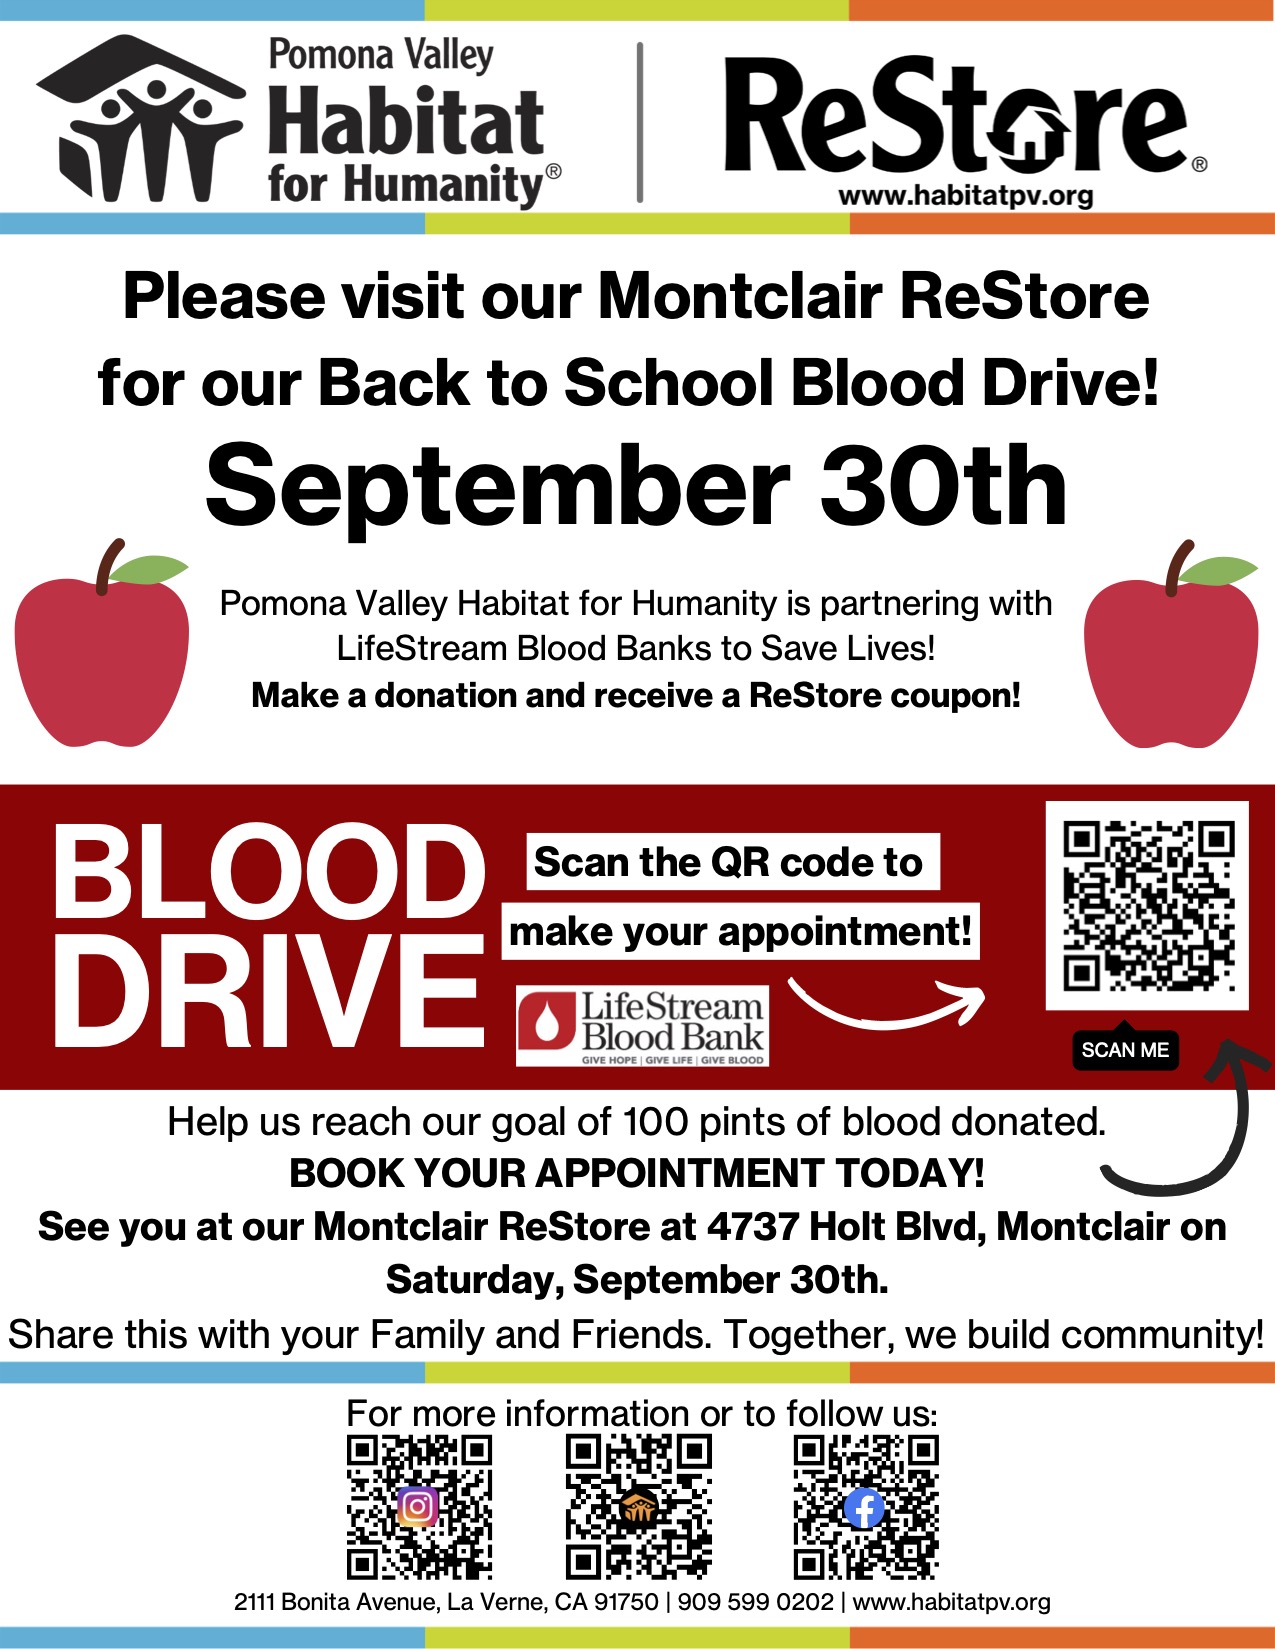 Back to School Blood Drive